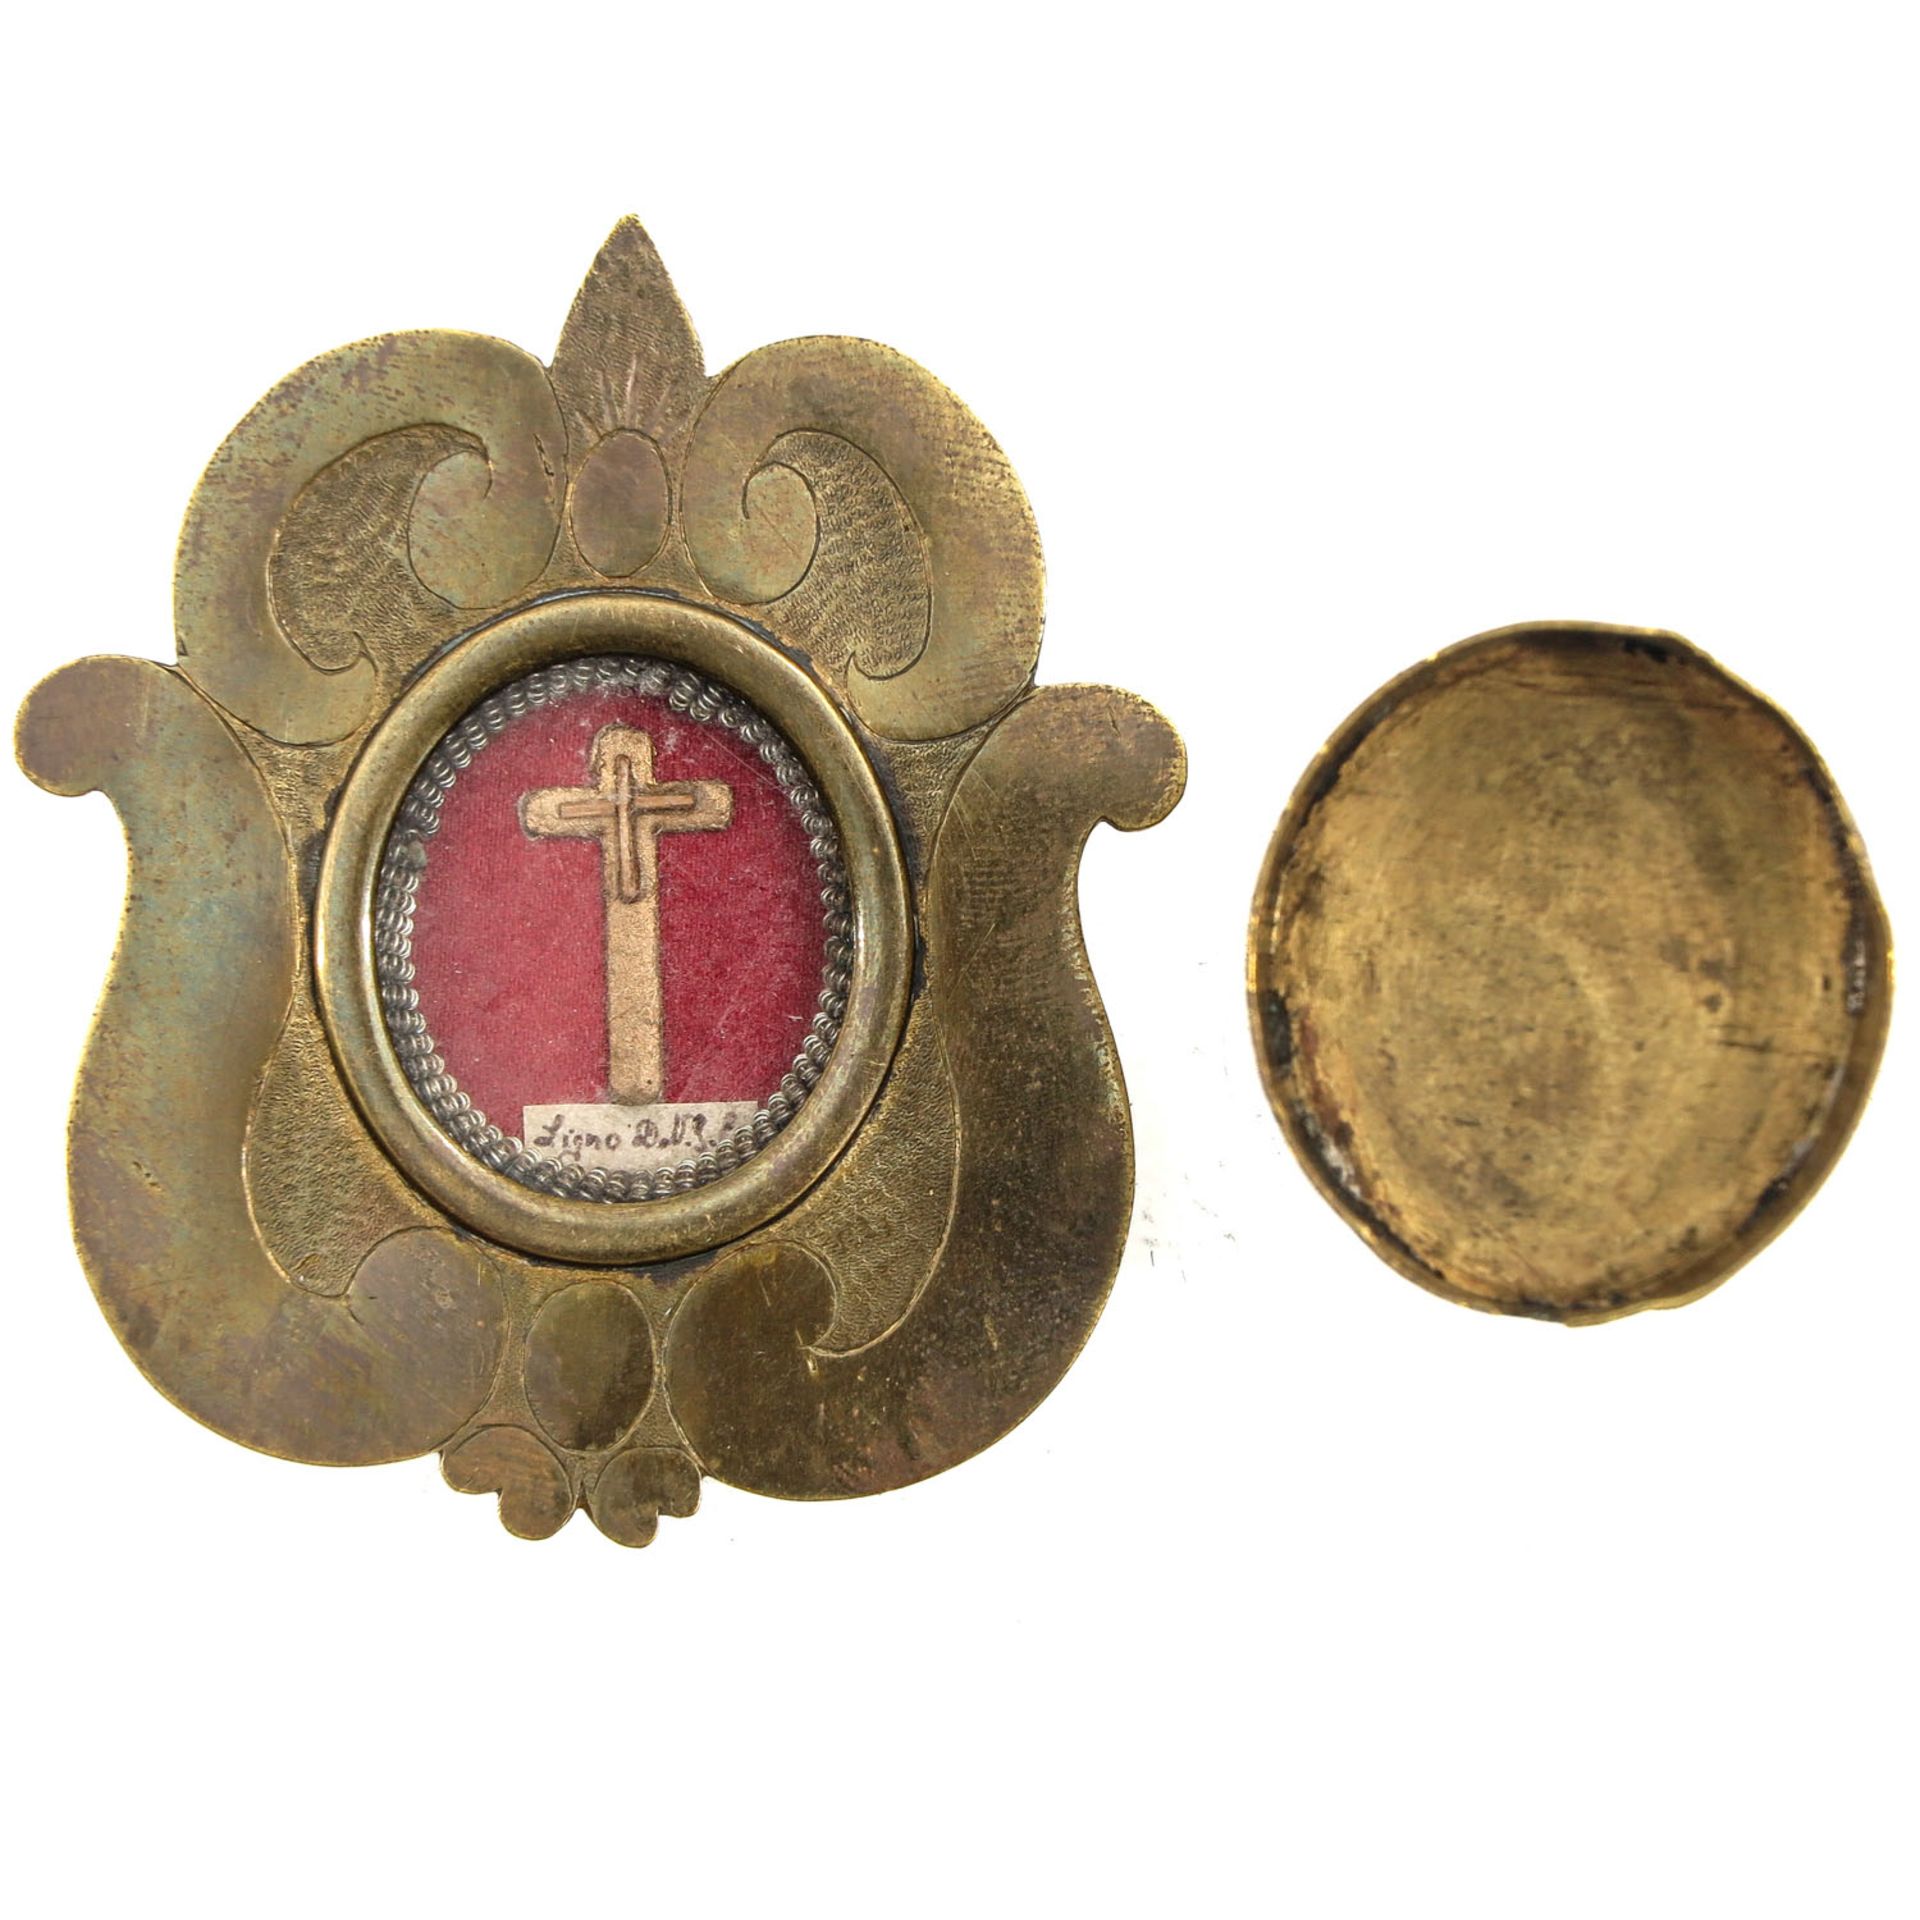 A Kiss Relic of The Holy Cross